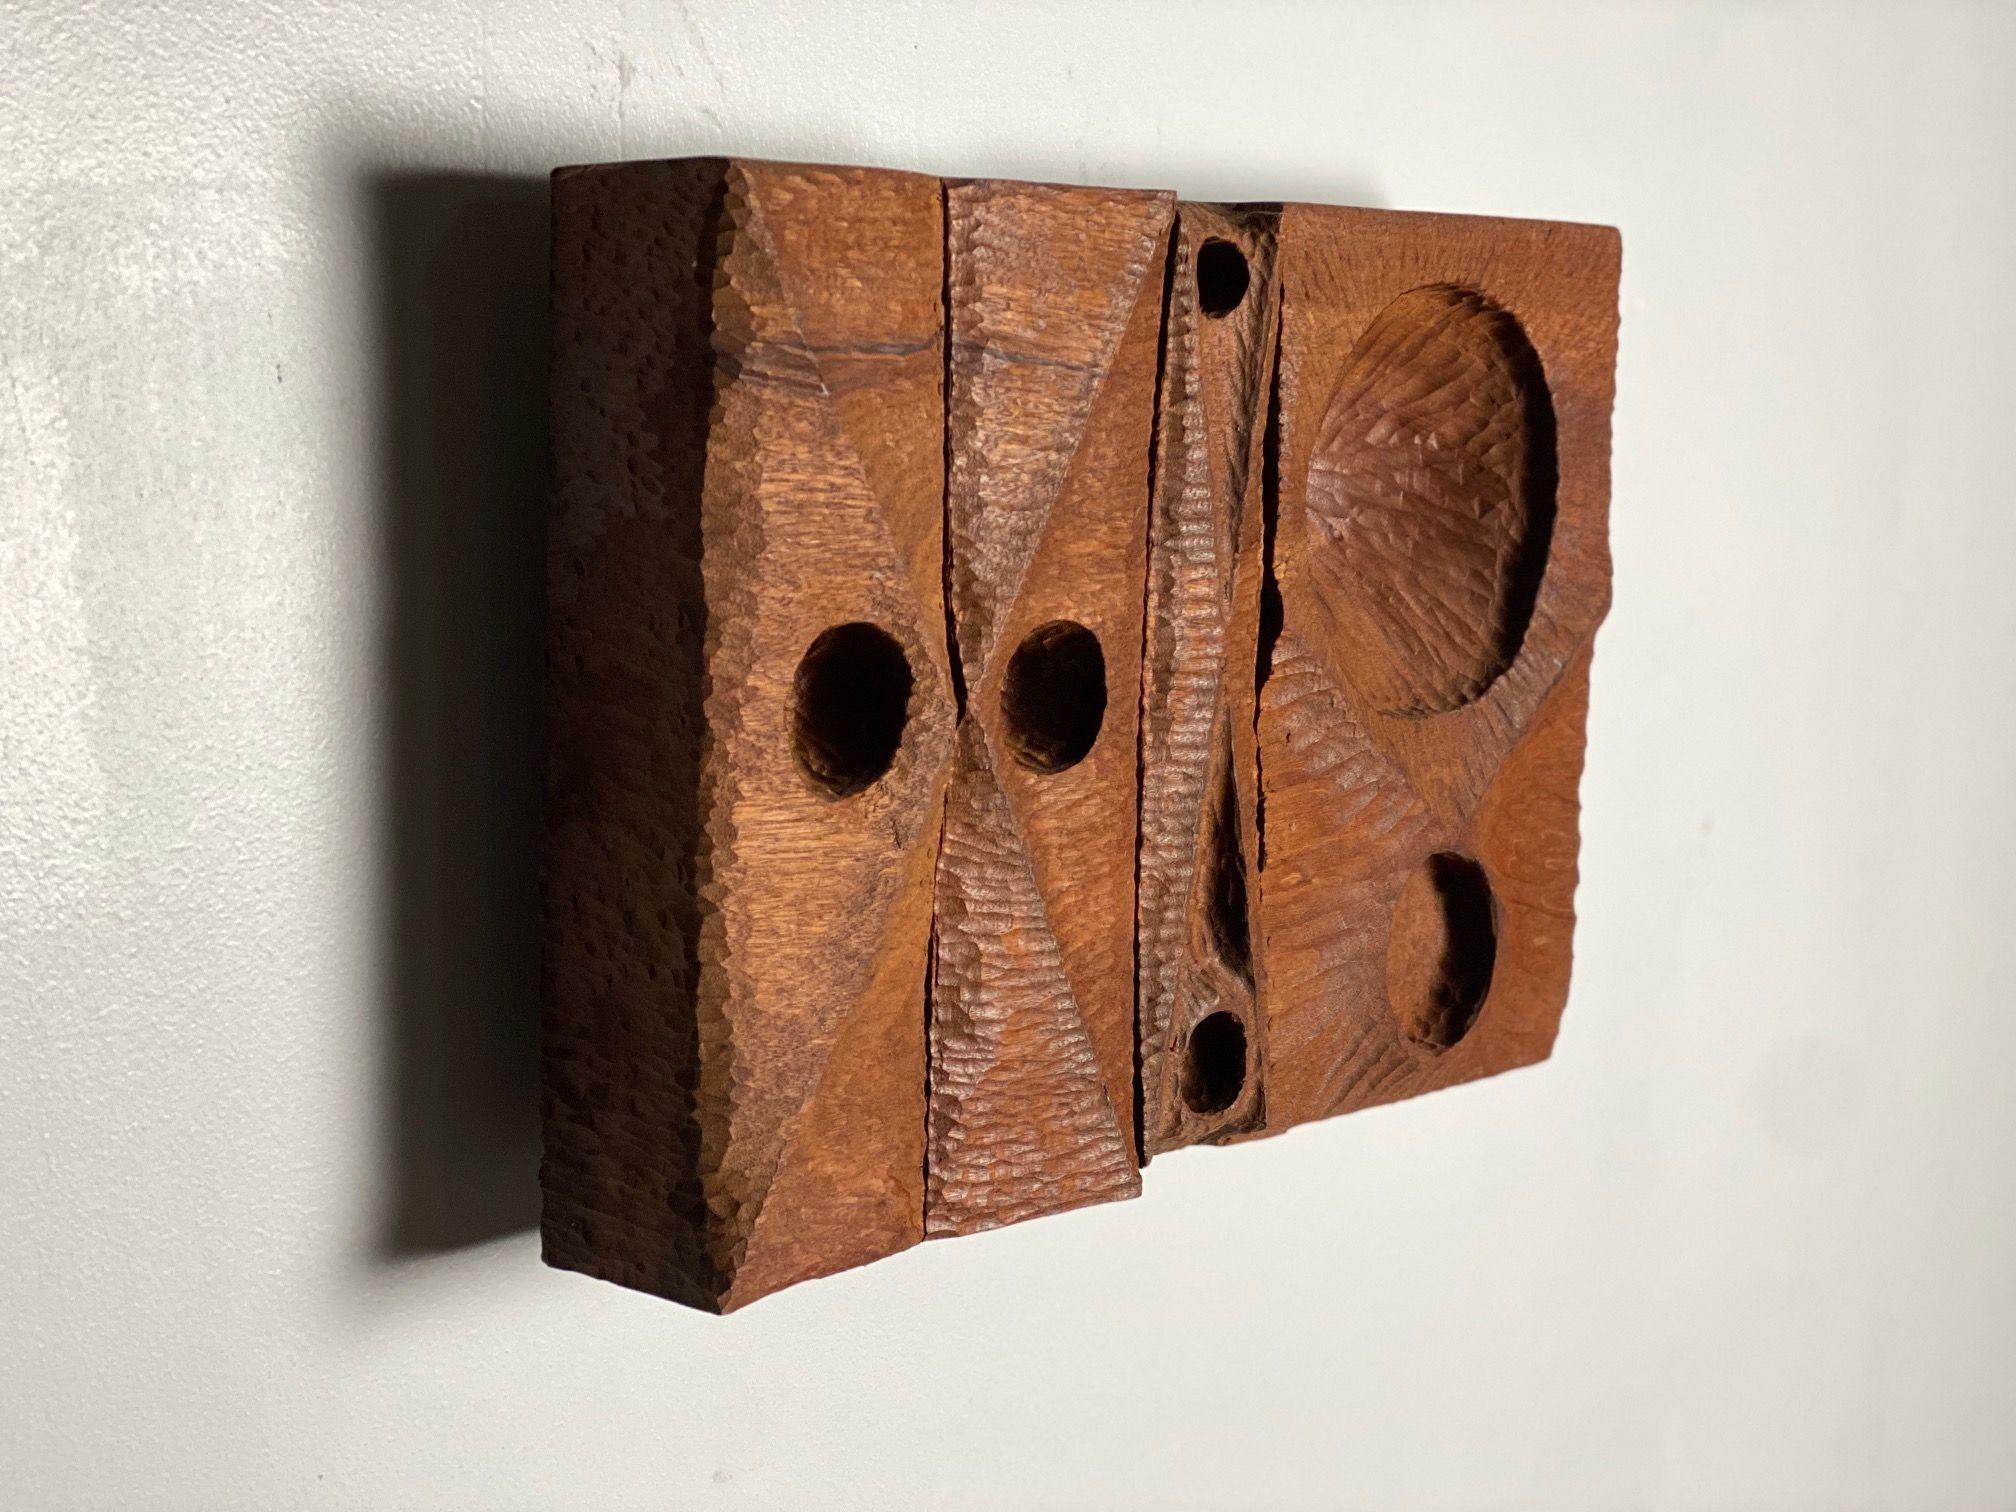 African Mahogany chip carved sculpture. A similar version is also available in maple.